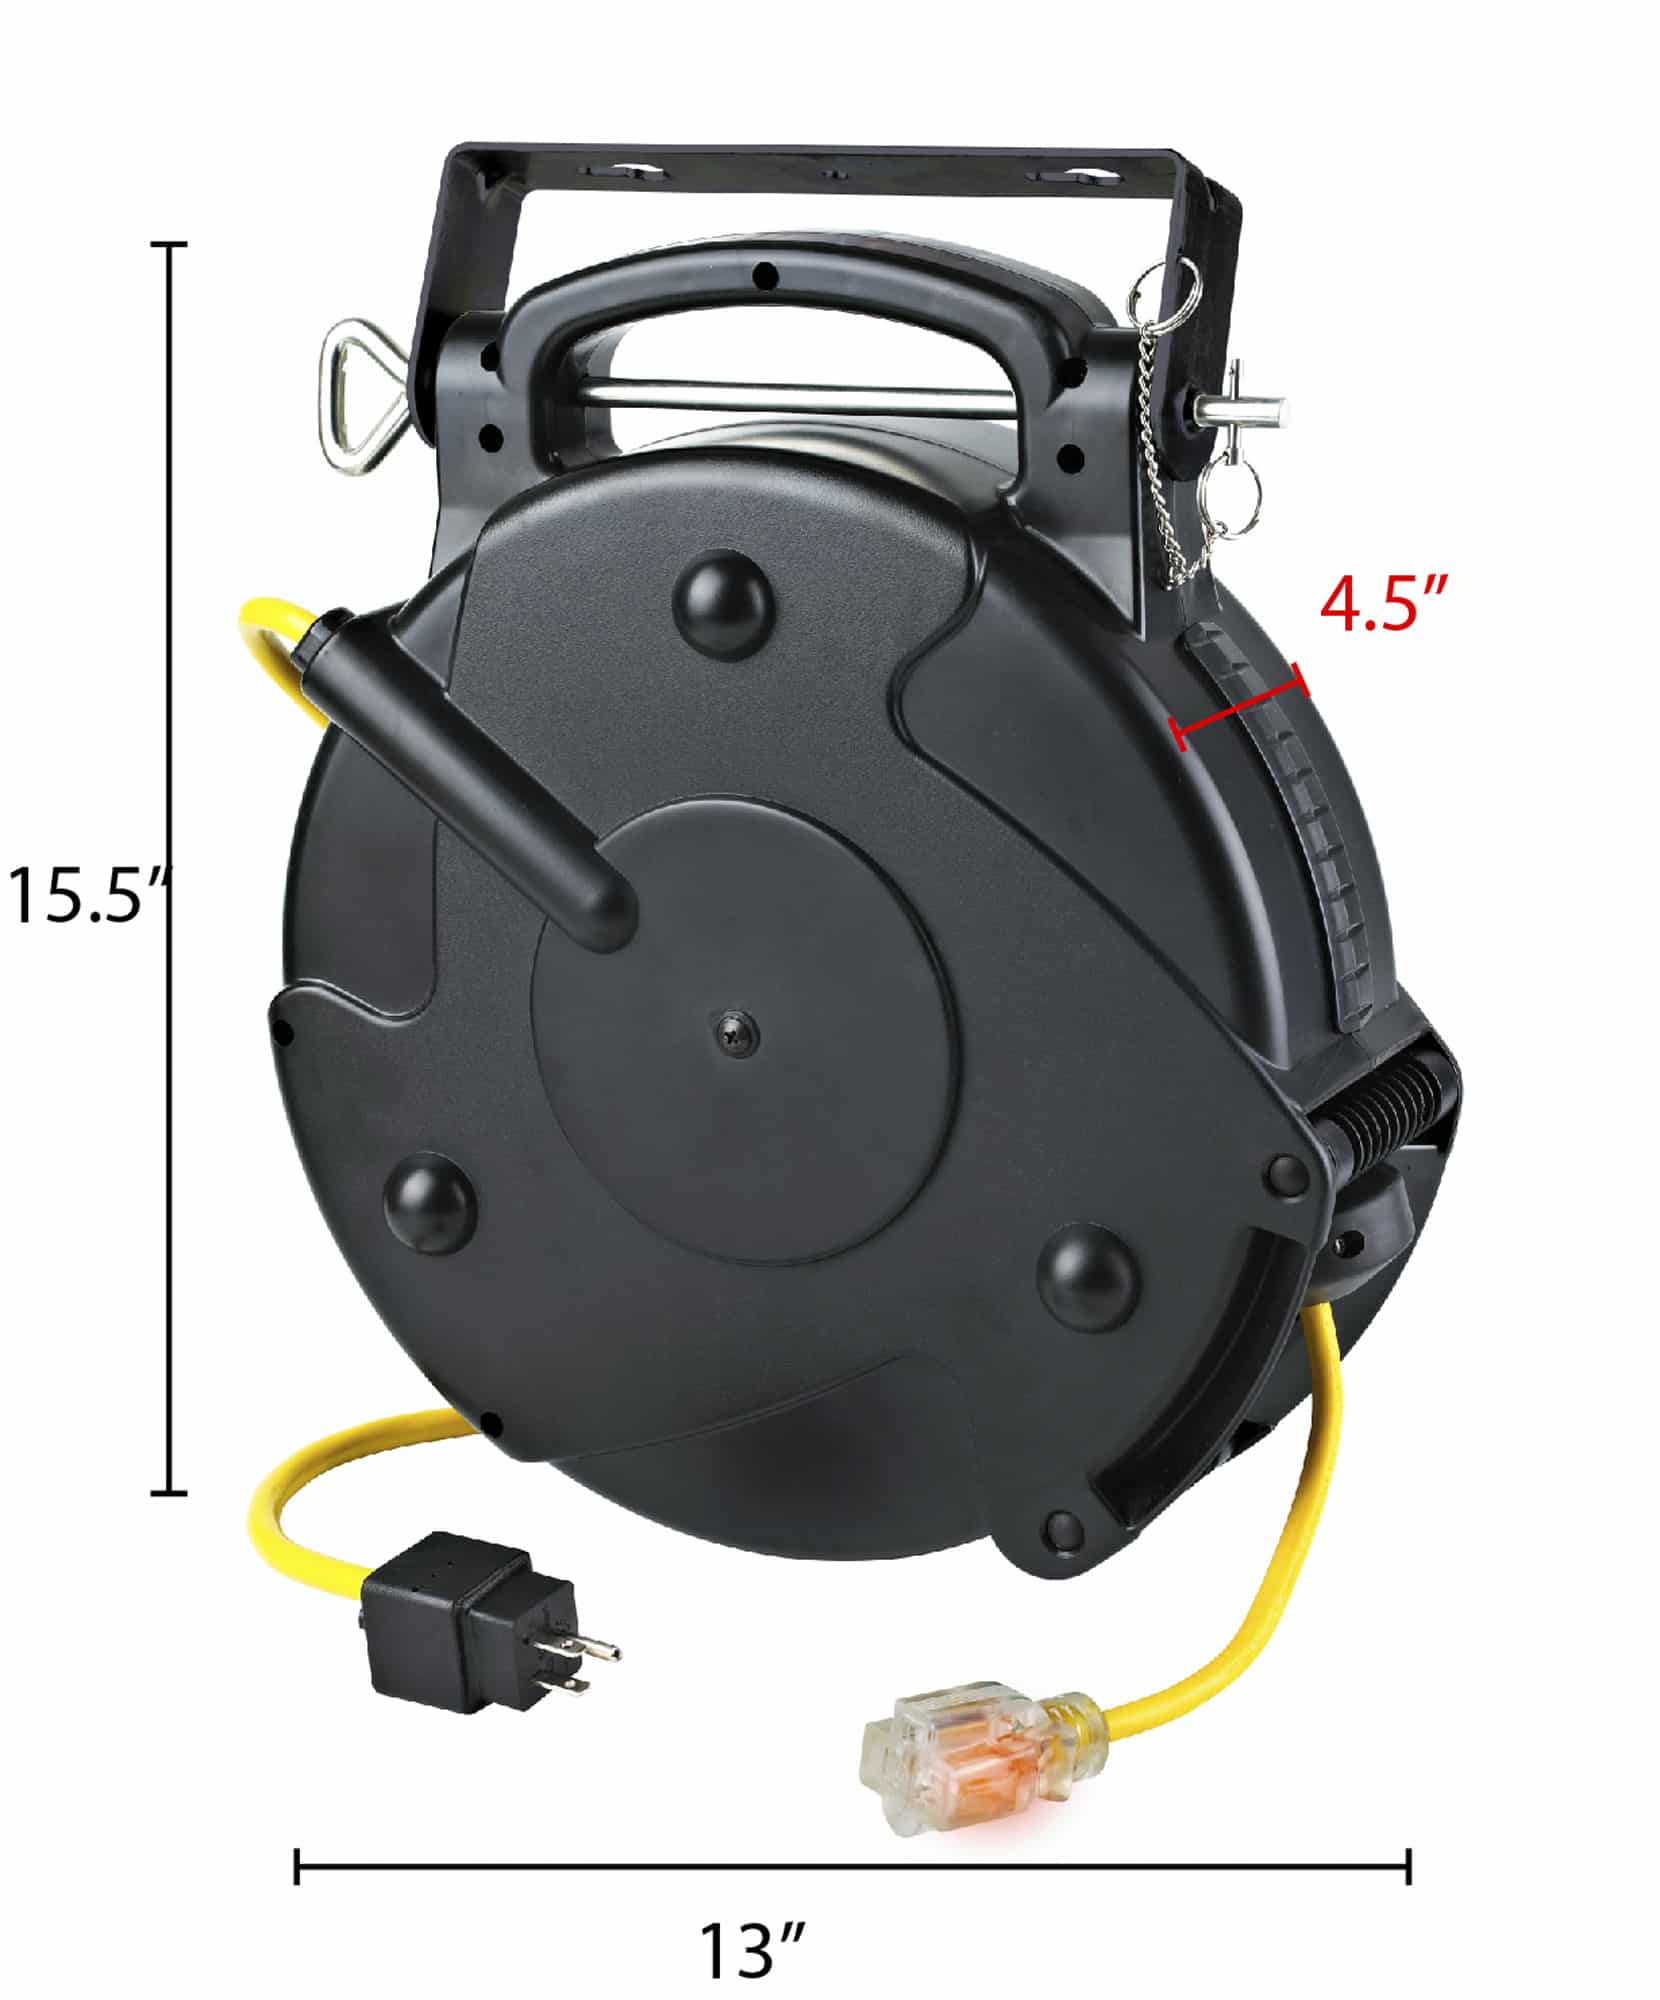 65' Retractable Cord Reel w/Outlet and Circuit Breaker - 8665TFS